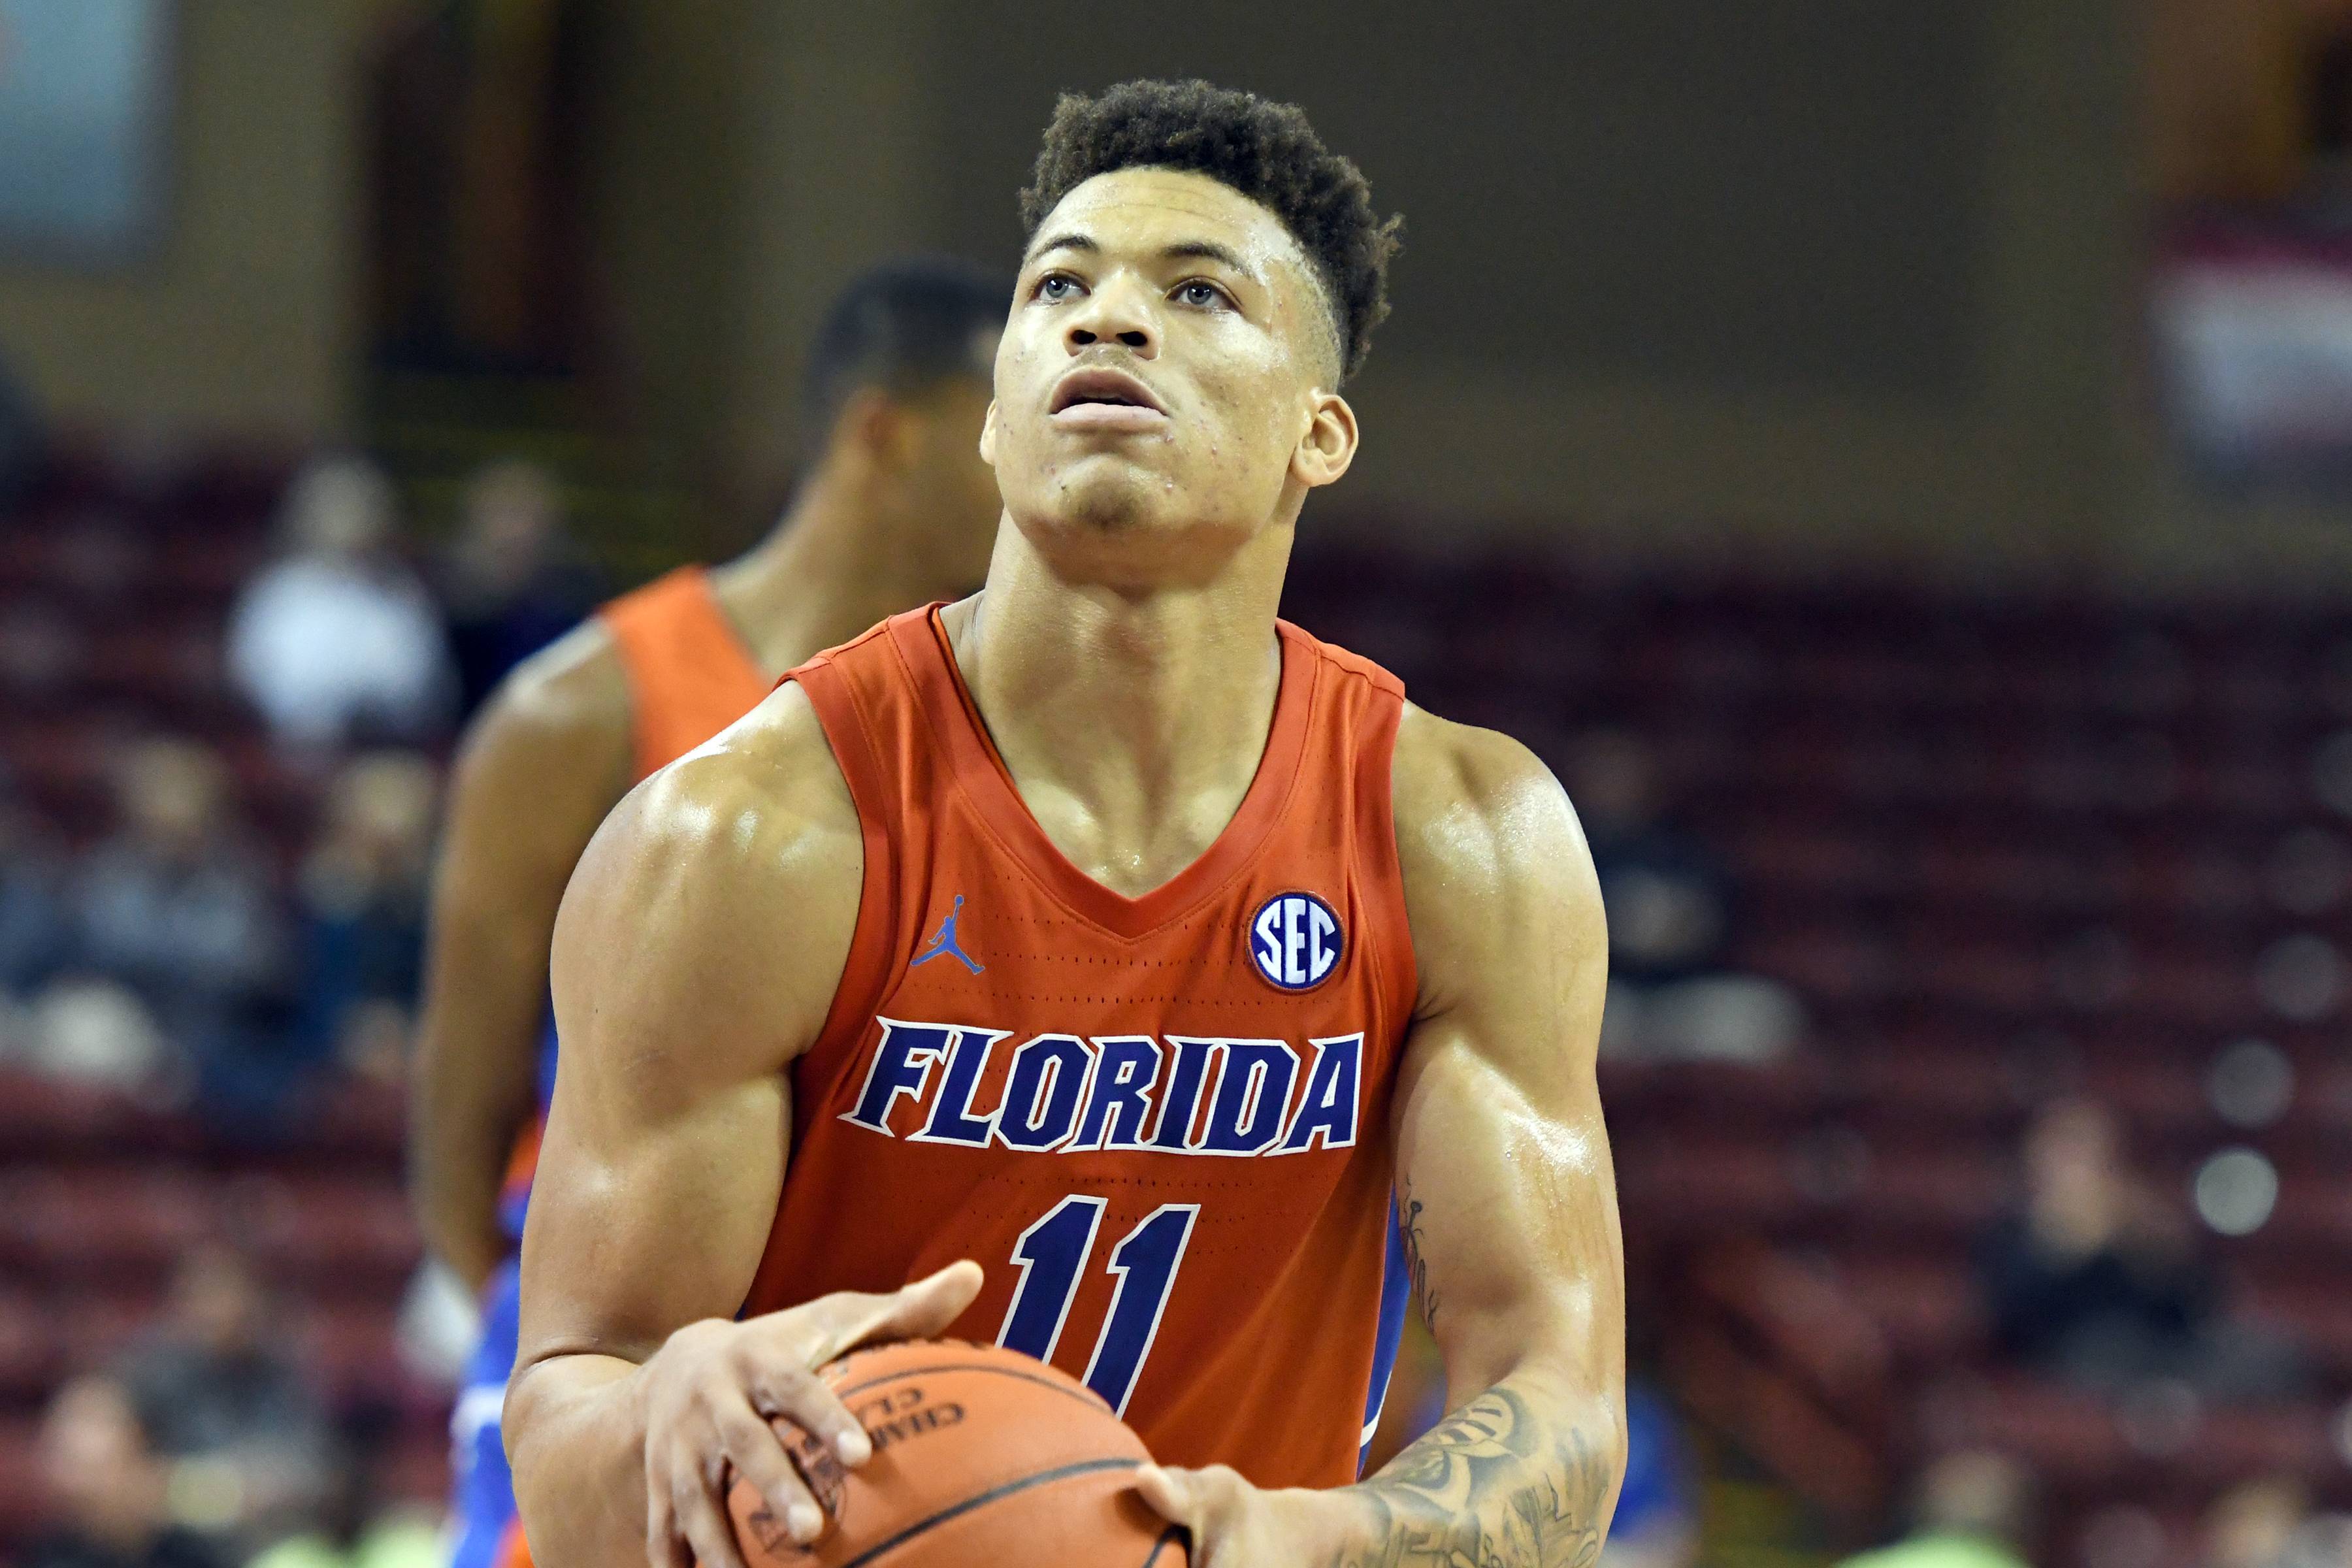 CHARLESTON, SC - NOVEMBER 21:  Keyontae Johnson #11 of the Florida Gators takes a foul shot during a first round Charleston Classic basketball game against the Saint Joseph's Hawks at the TD Arena on November 21, 2019 in Charleston, South Carolina.  (Photo by Mitchell Layton/Getty Images)